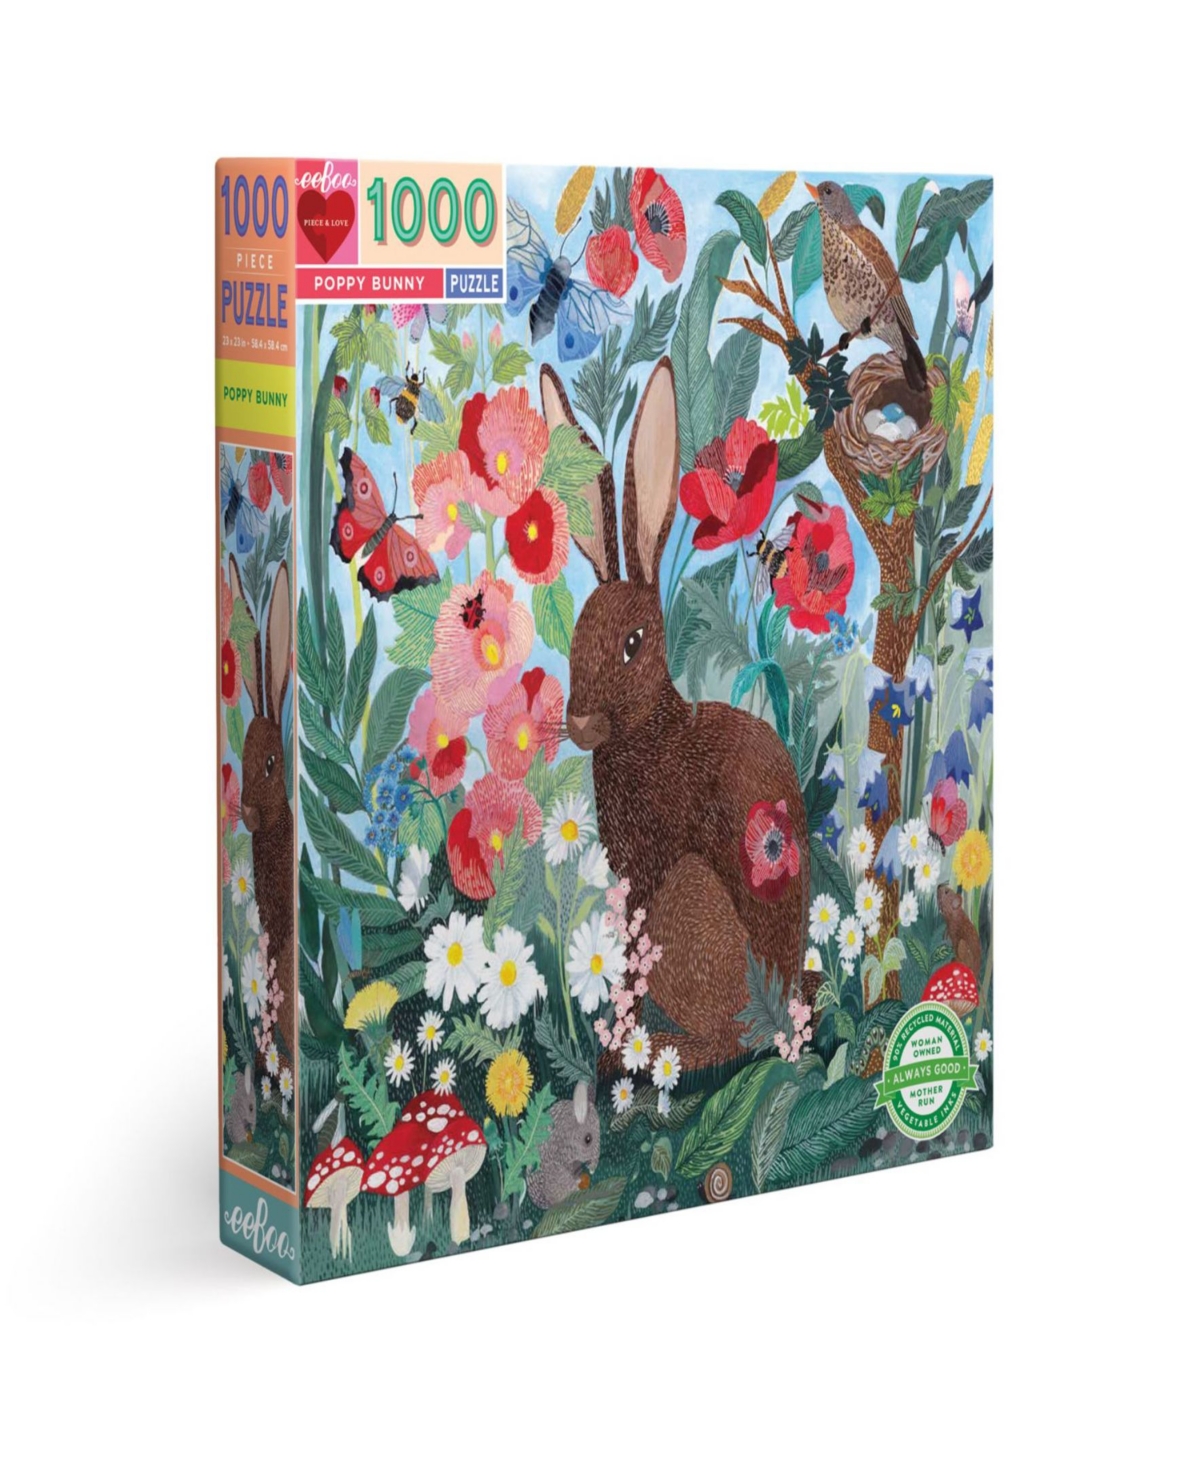 Eeboo Piece And Love Poppy Bunny Square Adult Jigsaw Puzzle Set, 1000 Piece In Multi